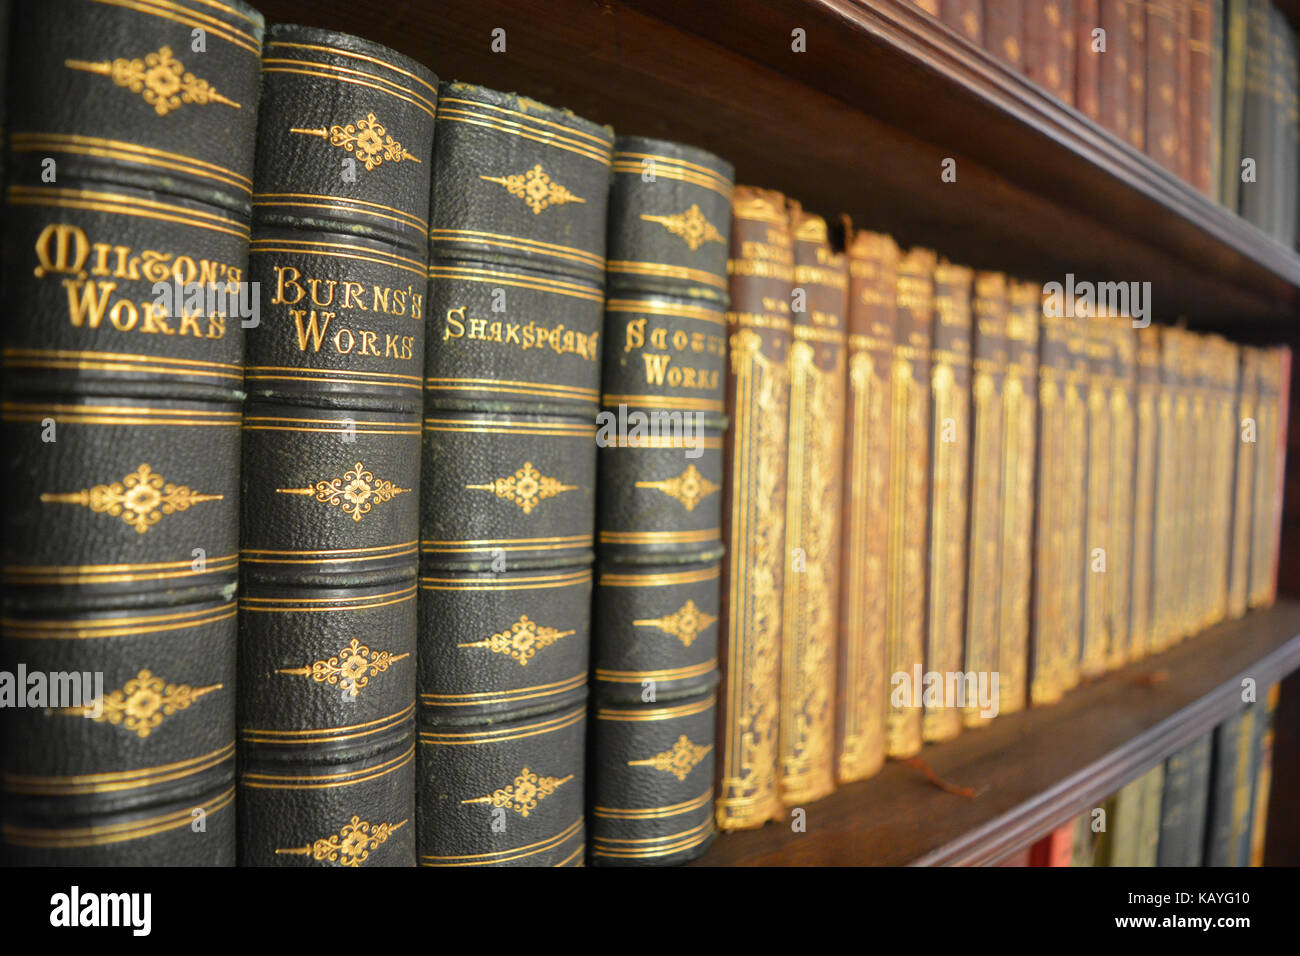 Antique books on a shelf in a bookcase Stock Photo